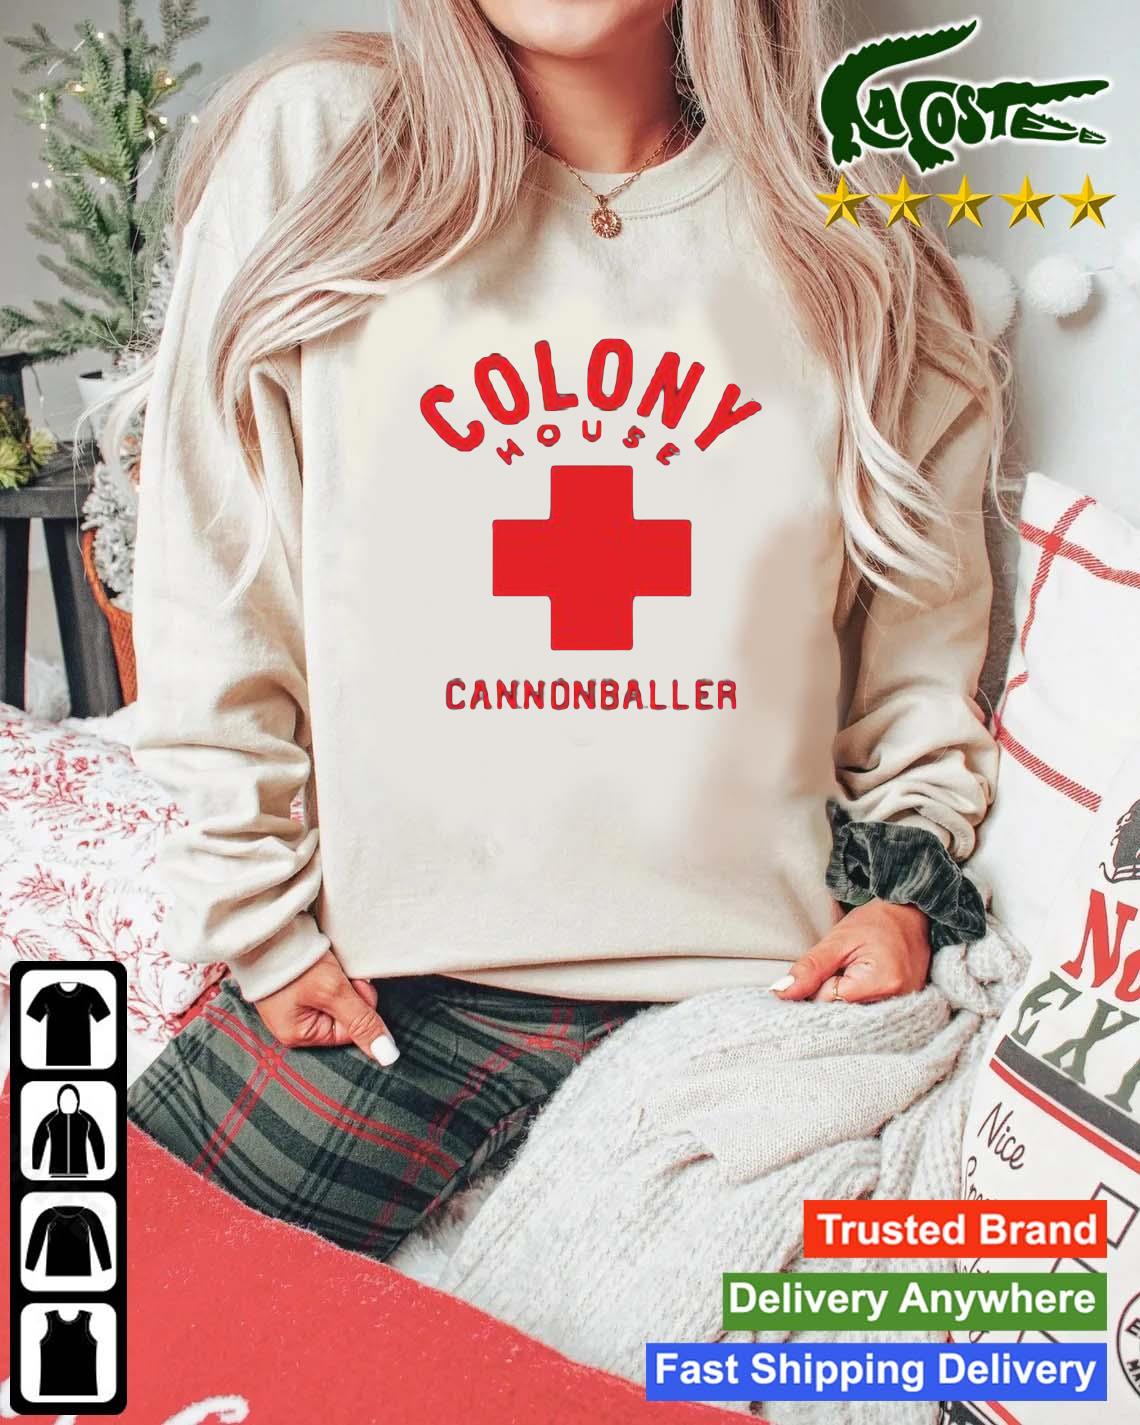 Colony House Cannonballer Sweats Mockup Sweater